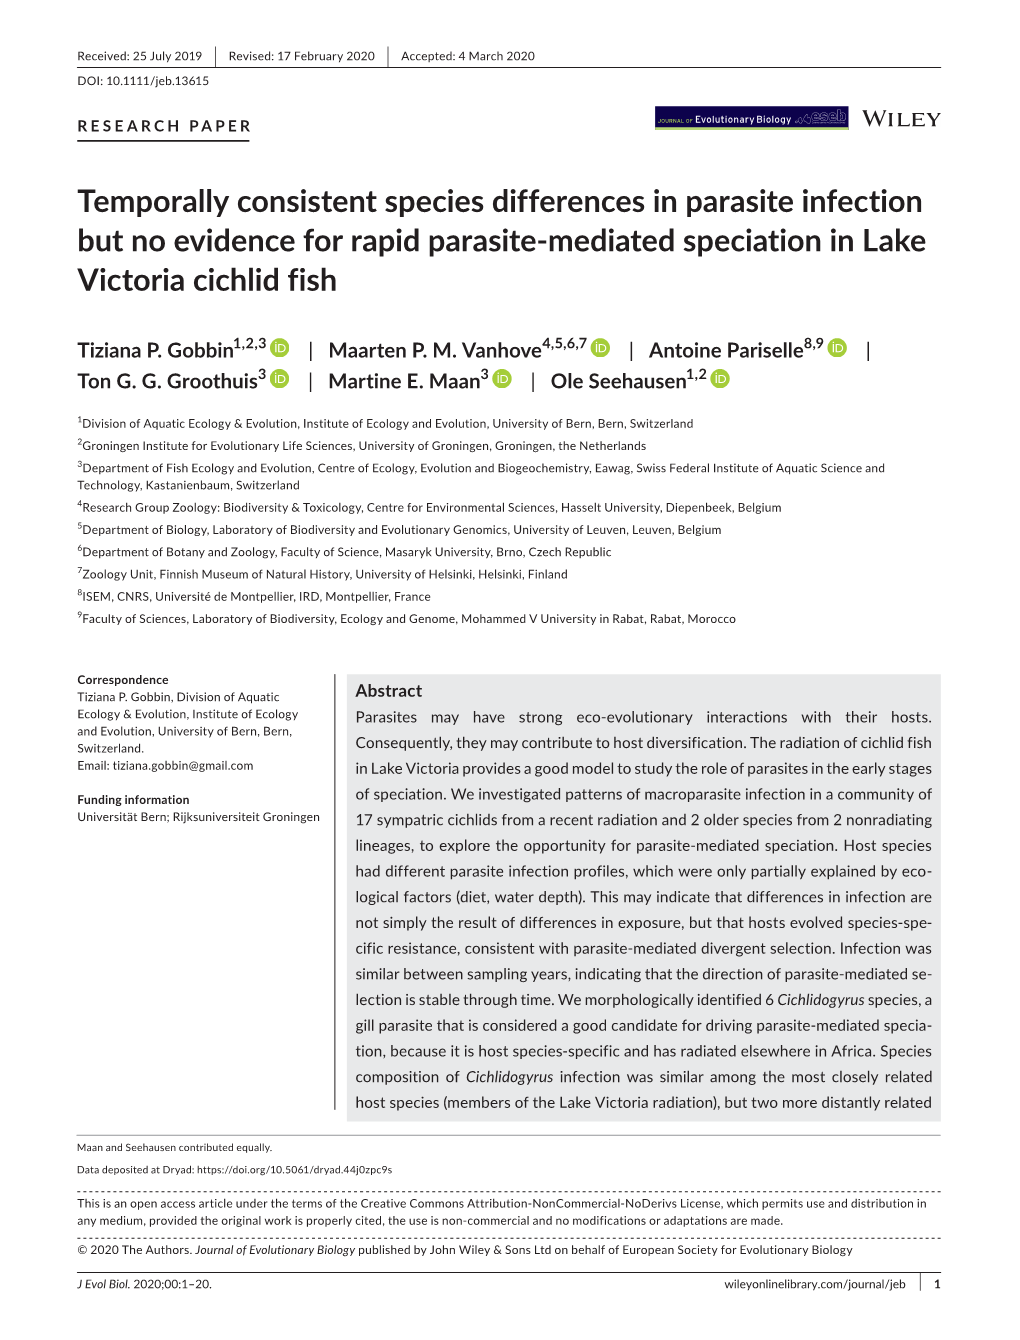 Temporally Consistent Species Differences in Parasite Infection but No Evidence for Rapid Parasite-Mediated Speciation in Lake Victoria Cichlid Fish